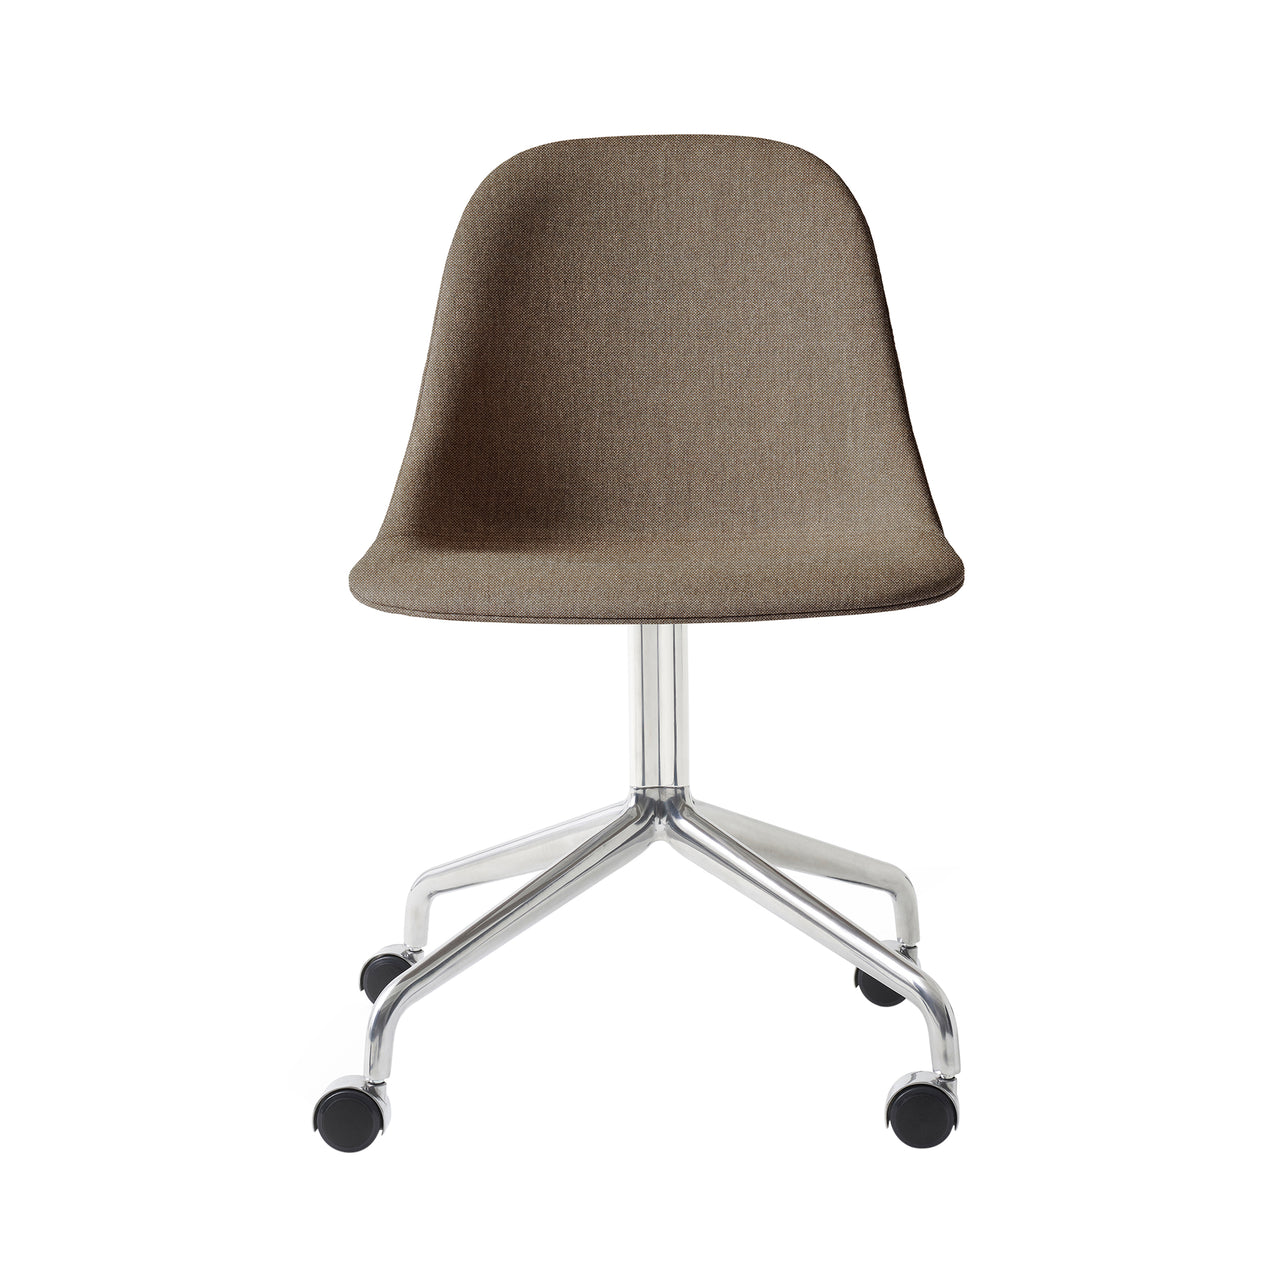 Harbour Swivel Side Chair with Casters: Upholstered + Polished Aluminum